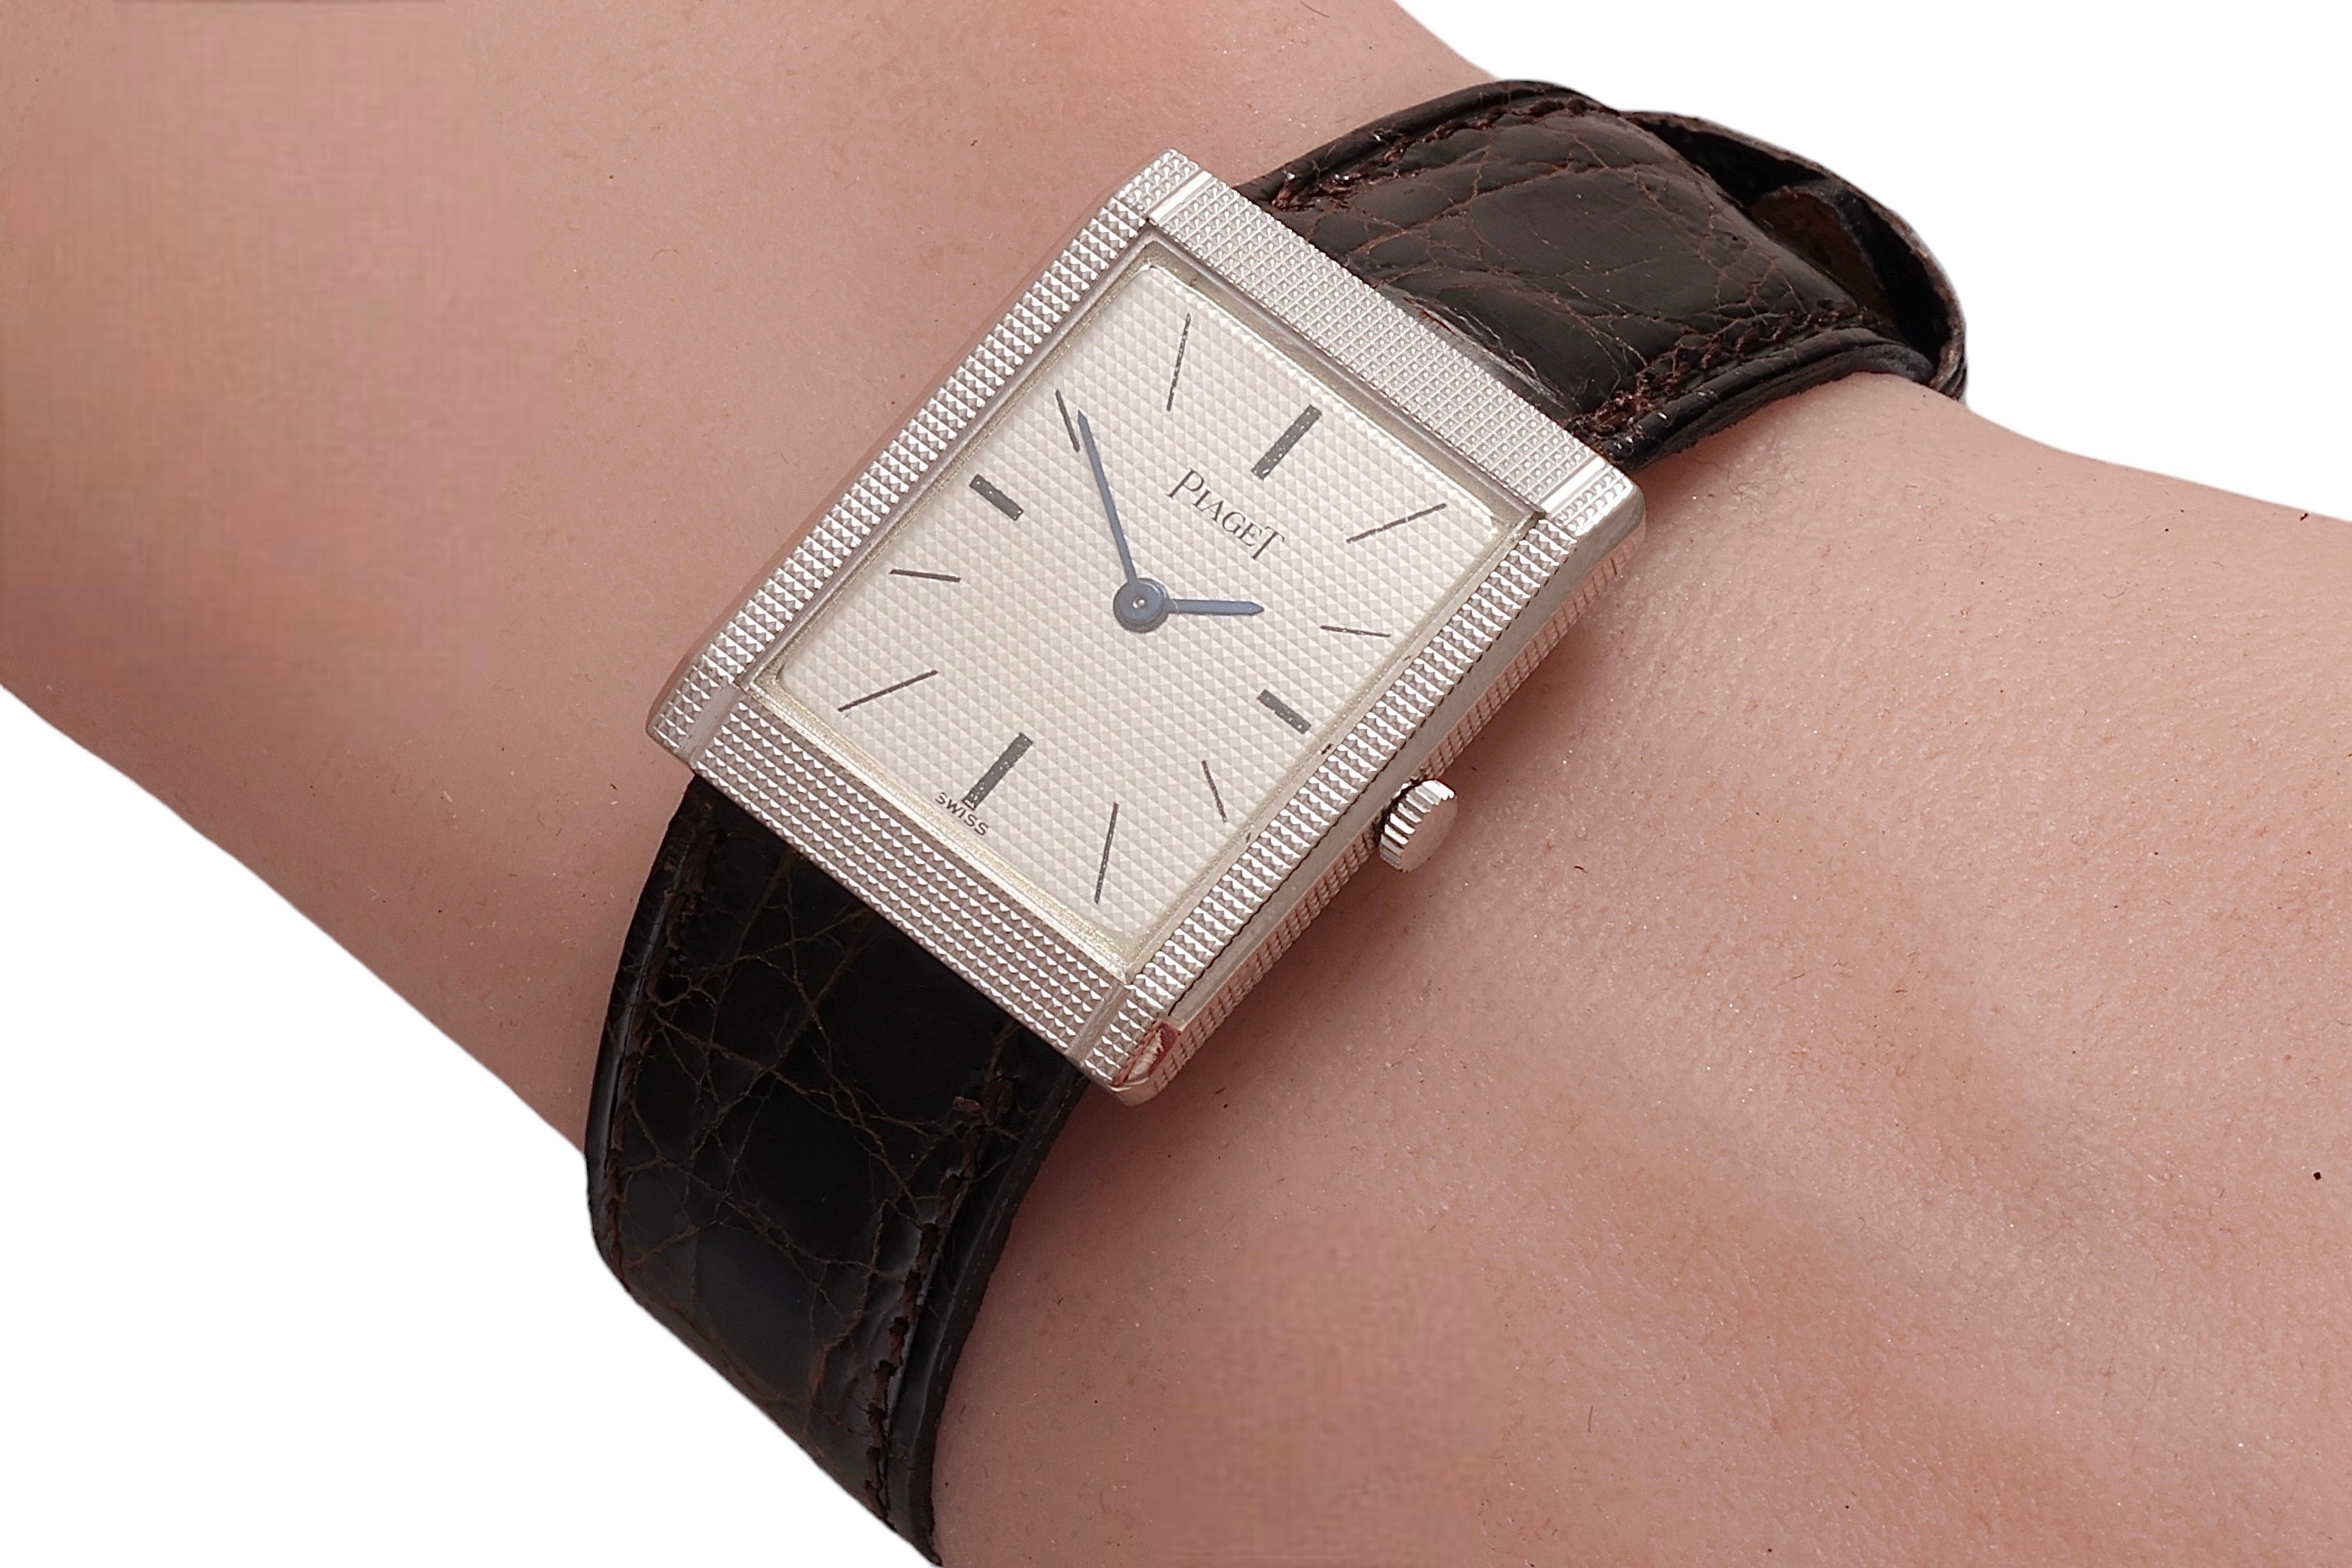 18 kt. White Gold Piaget Wrist Watch, Manual Winding Ultra Thin, Collectors For Sale 1